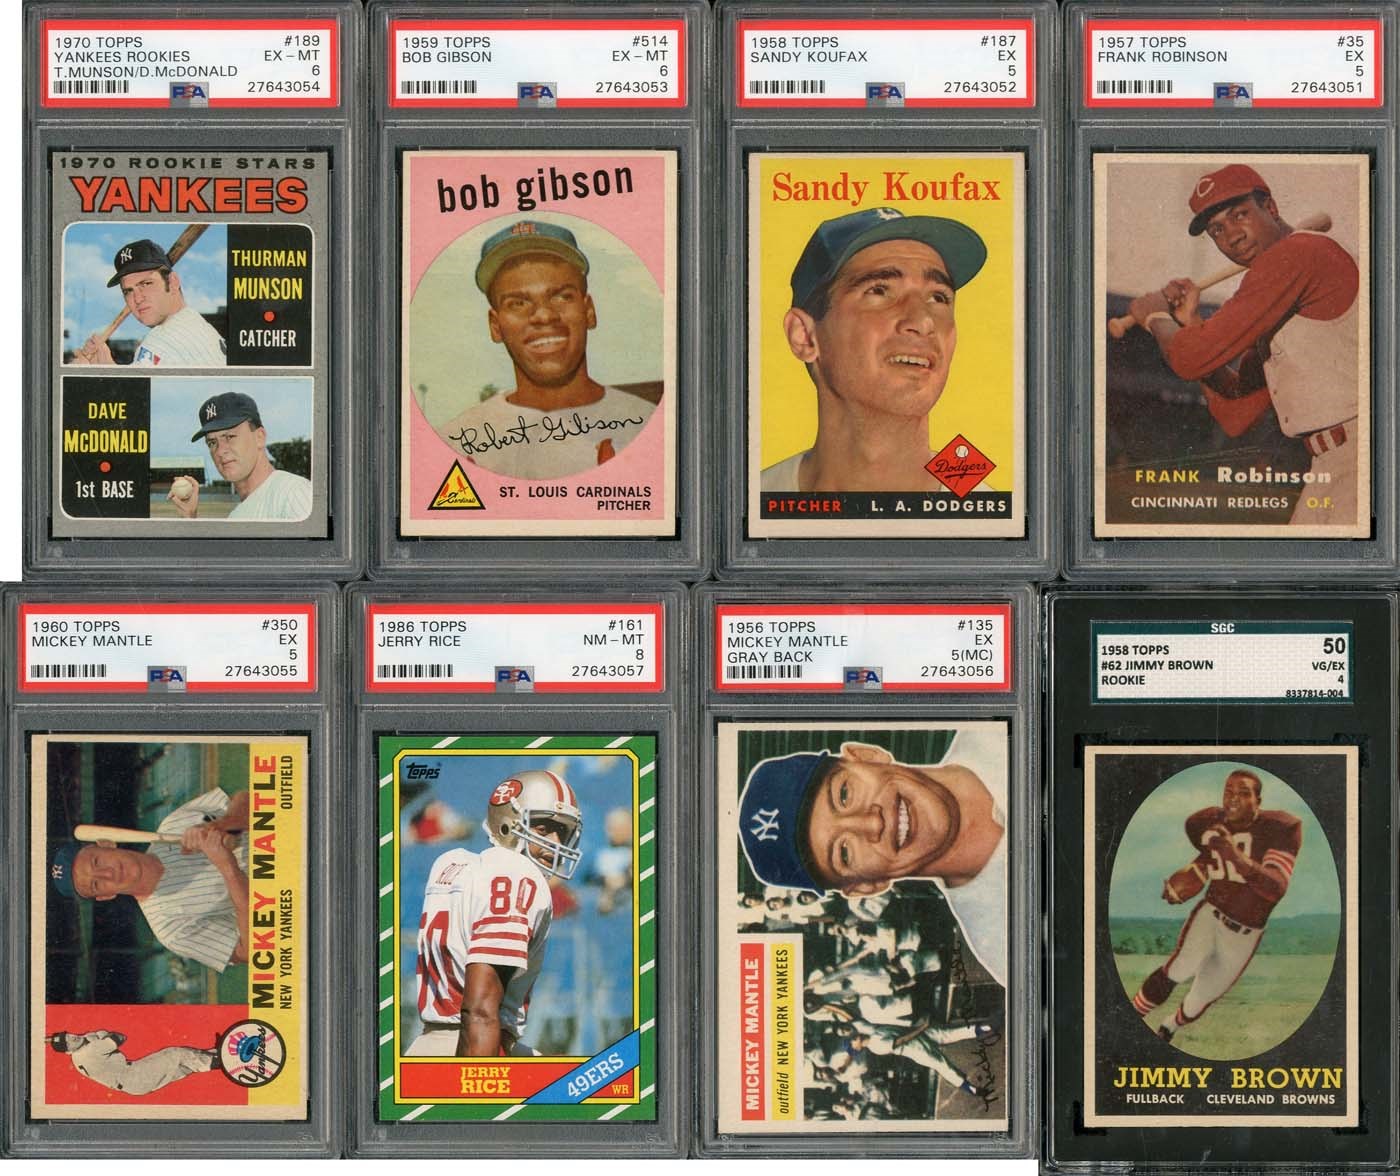 1956-1986 Topps Multi-Sport HOFer PSA - SGC Graded Collection with Mantle (2) and Jimmy Brown RC!